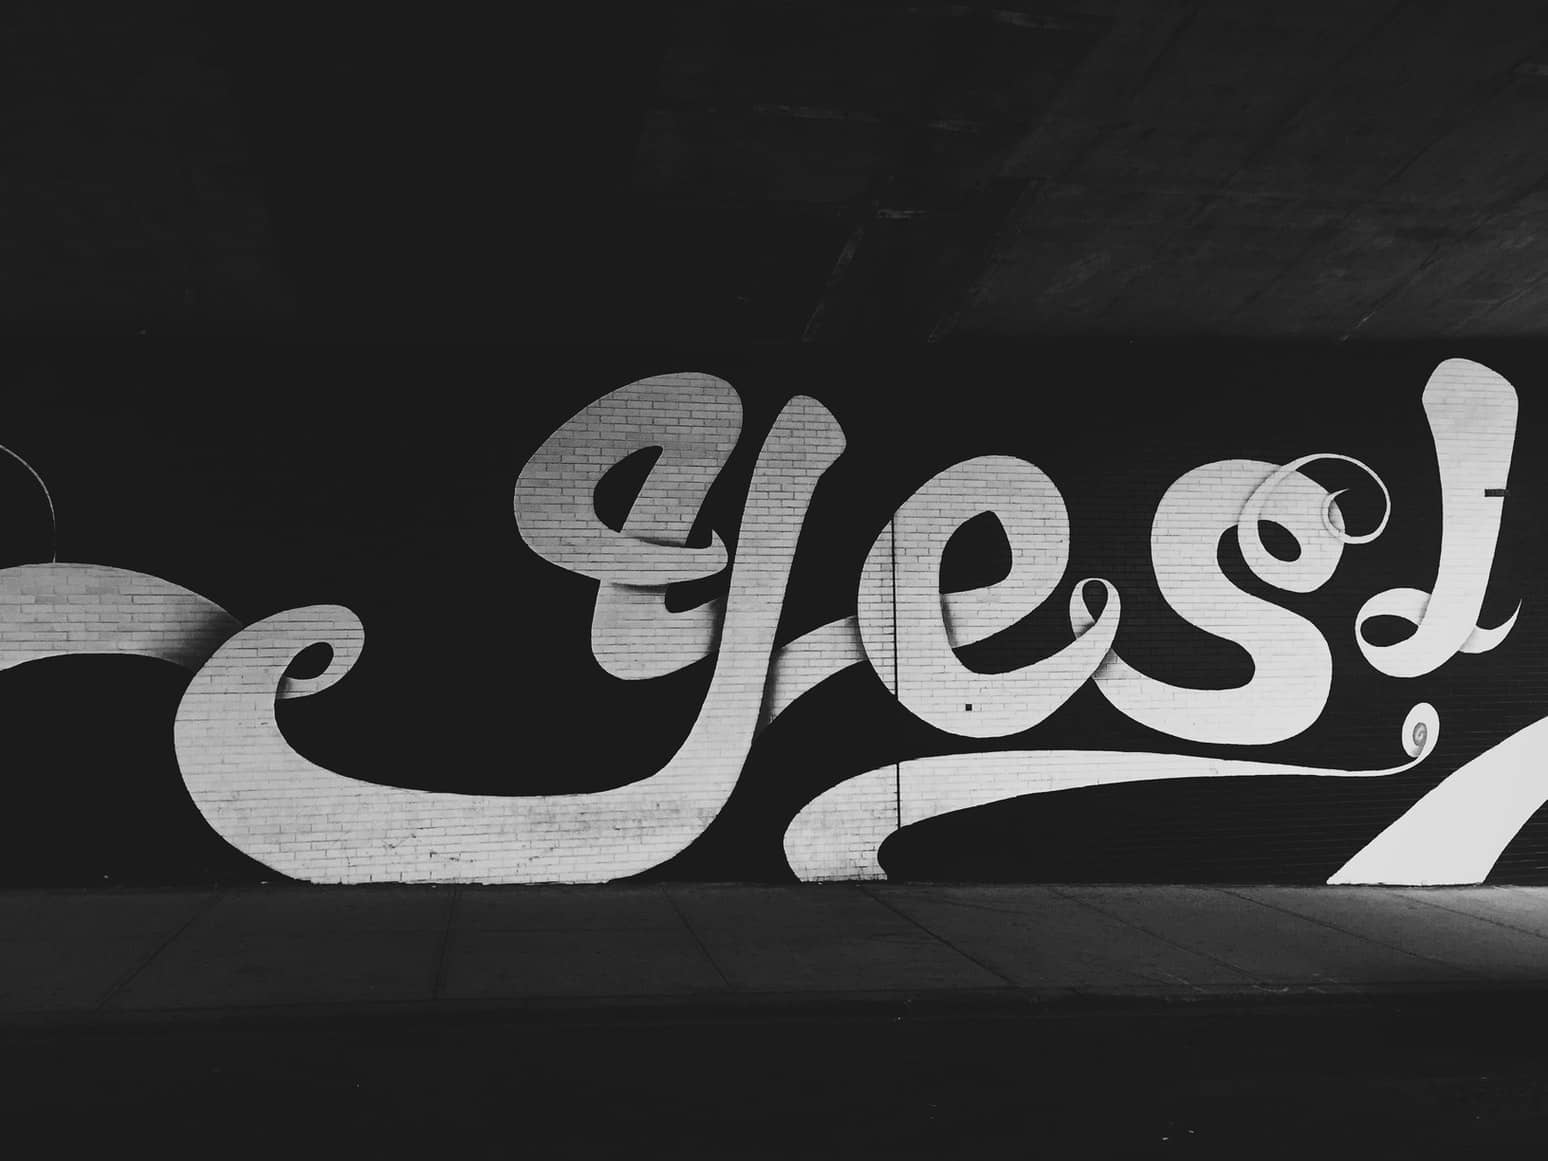 Graffiti on large wall spelling out 'yes'